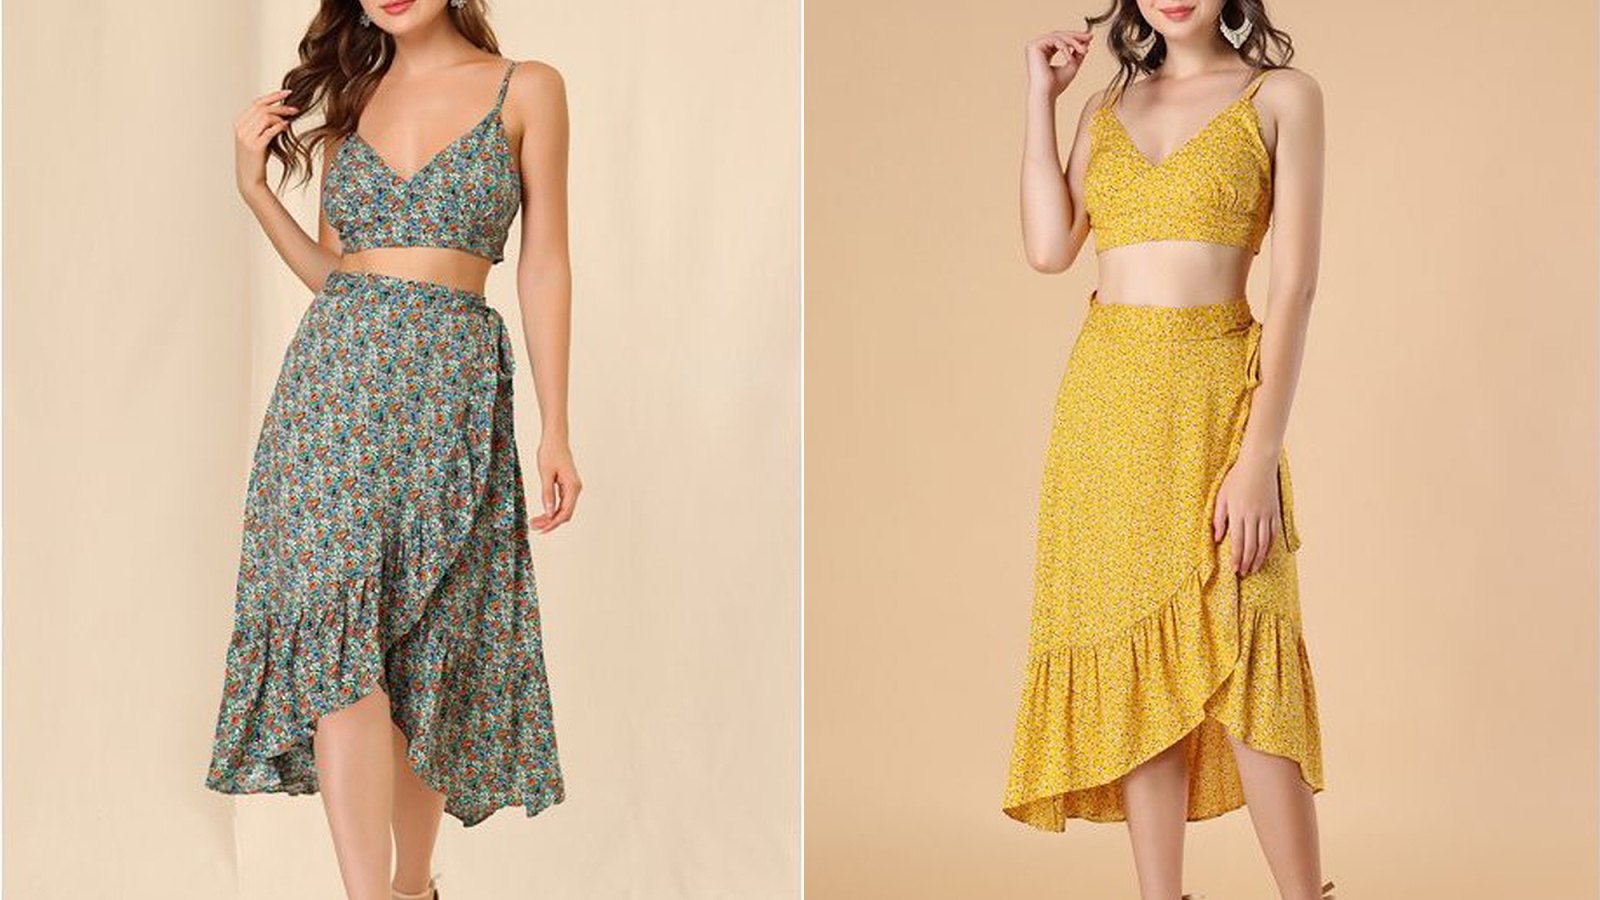 Kmart Australia - Refresh your spring wardrobe with our latest matching  sets and co-ords. Shop our Twist Crop Top, $20 and matching Tier Maxi  Skirt, $22 to complete the look. Also, available